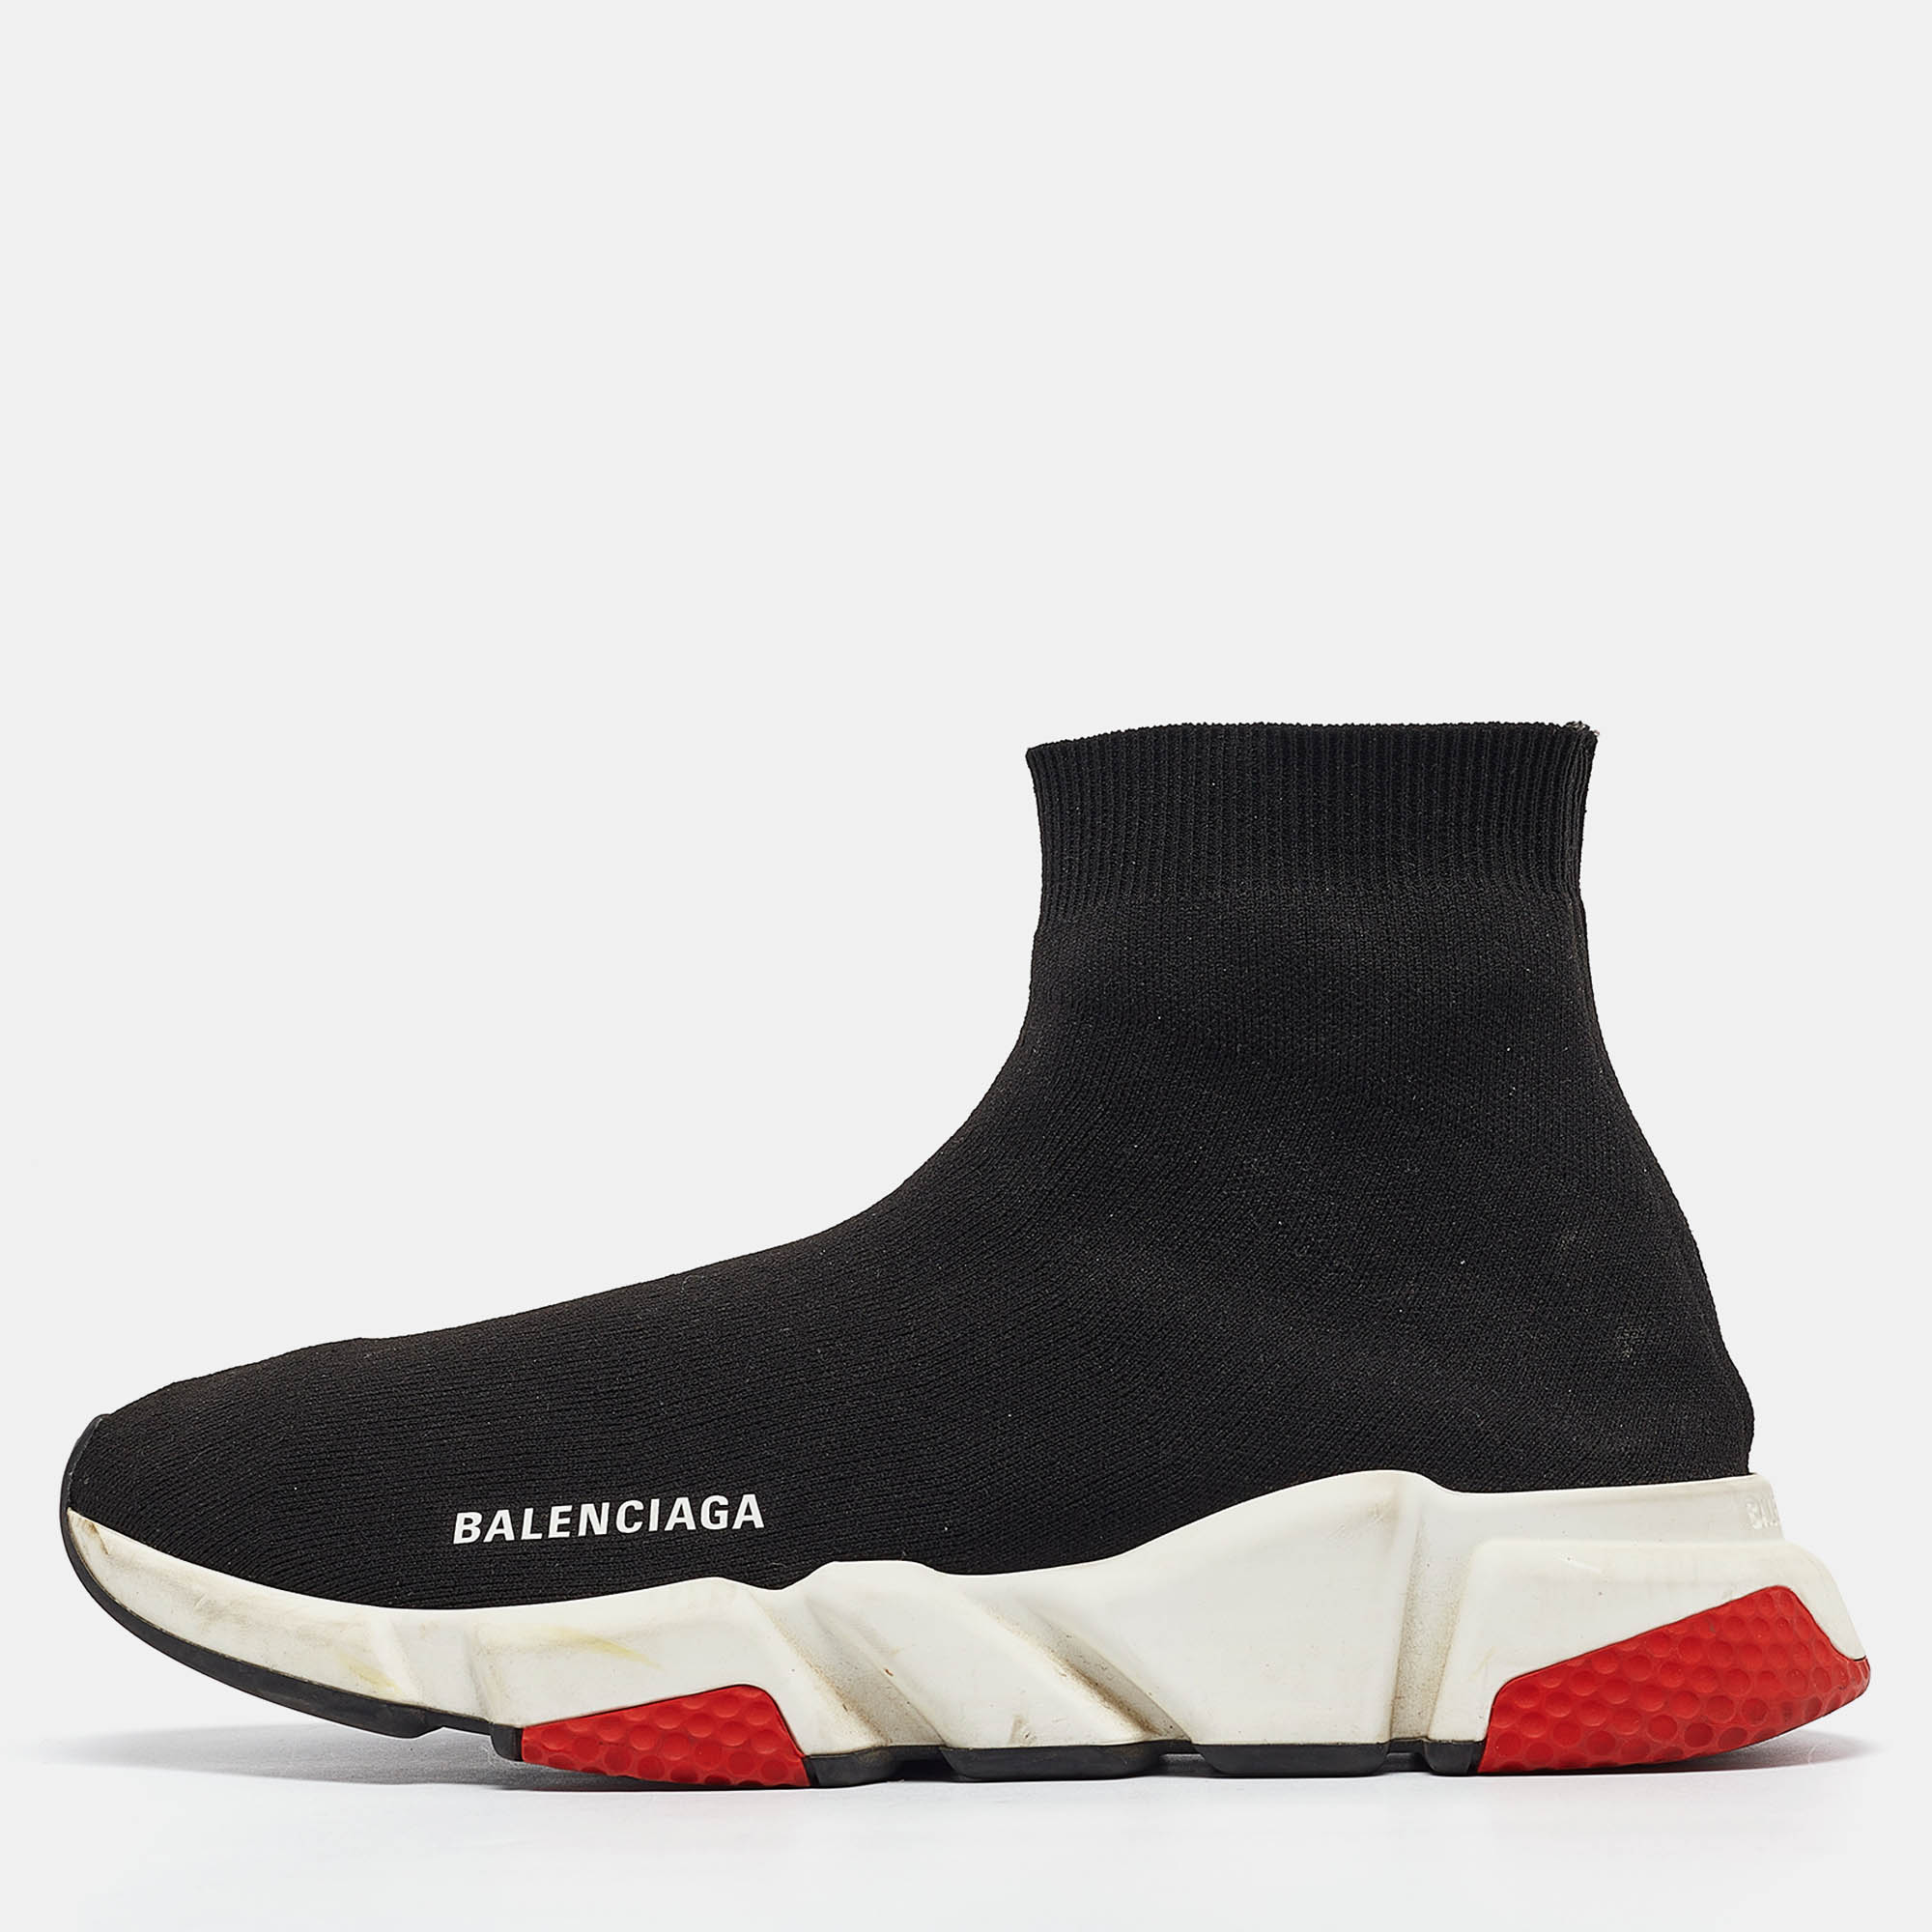 

Balenciaga Black Knit Fabric Speed Trainer Sneakers Size